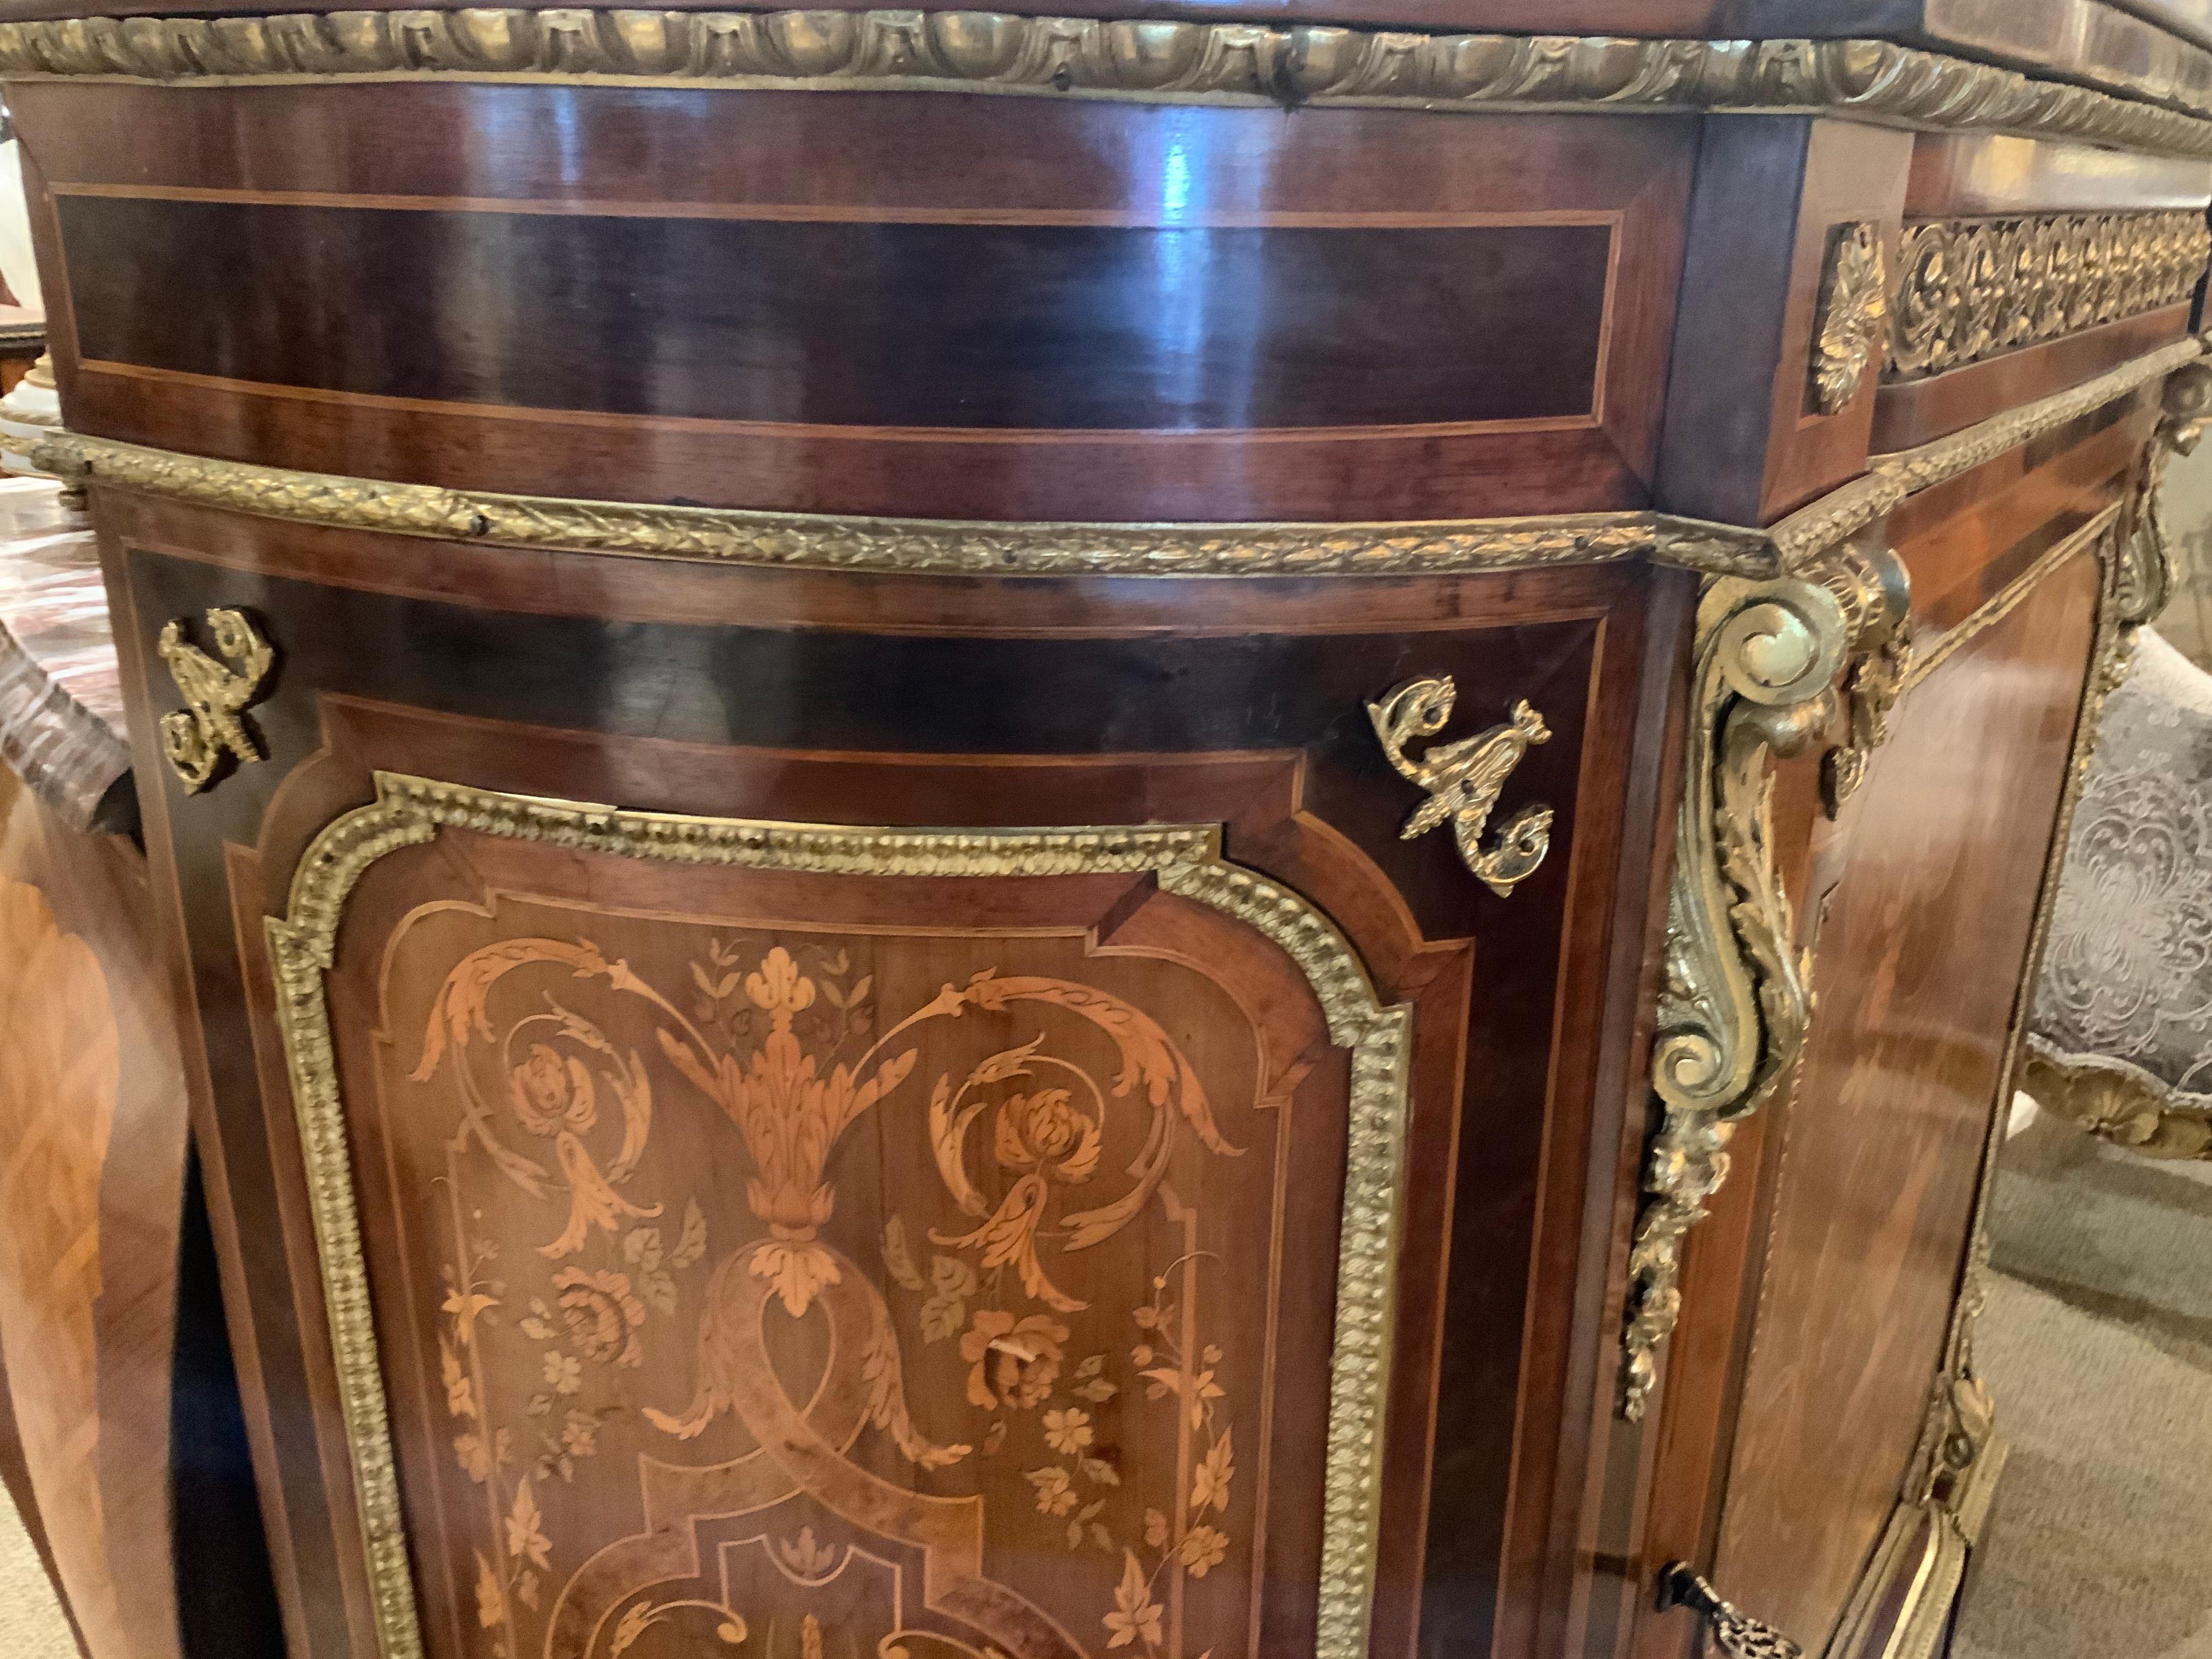 19th Century French Louis XVI-Style Cabinet with Marquetry Inlay and Marble Top, 19th C.